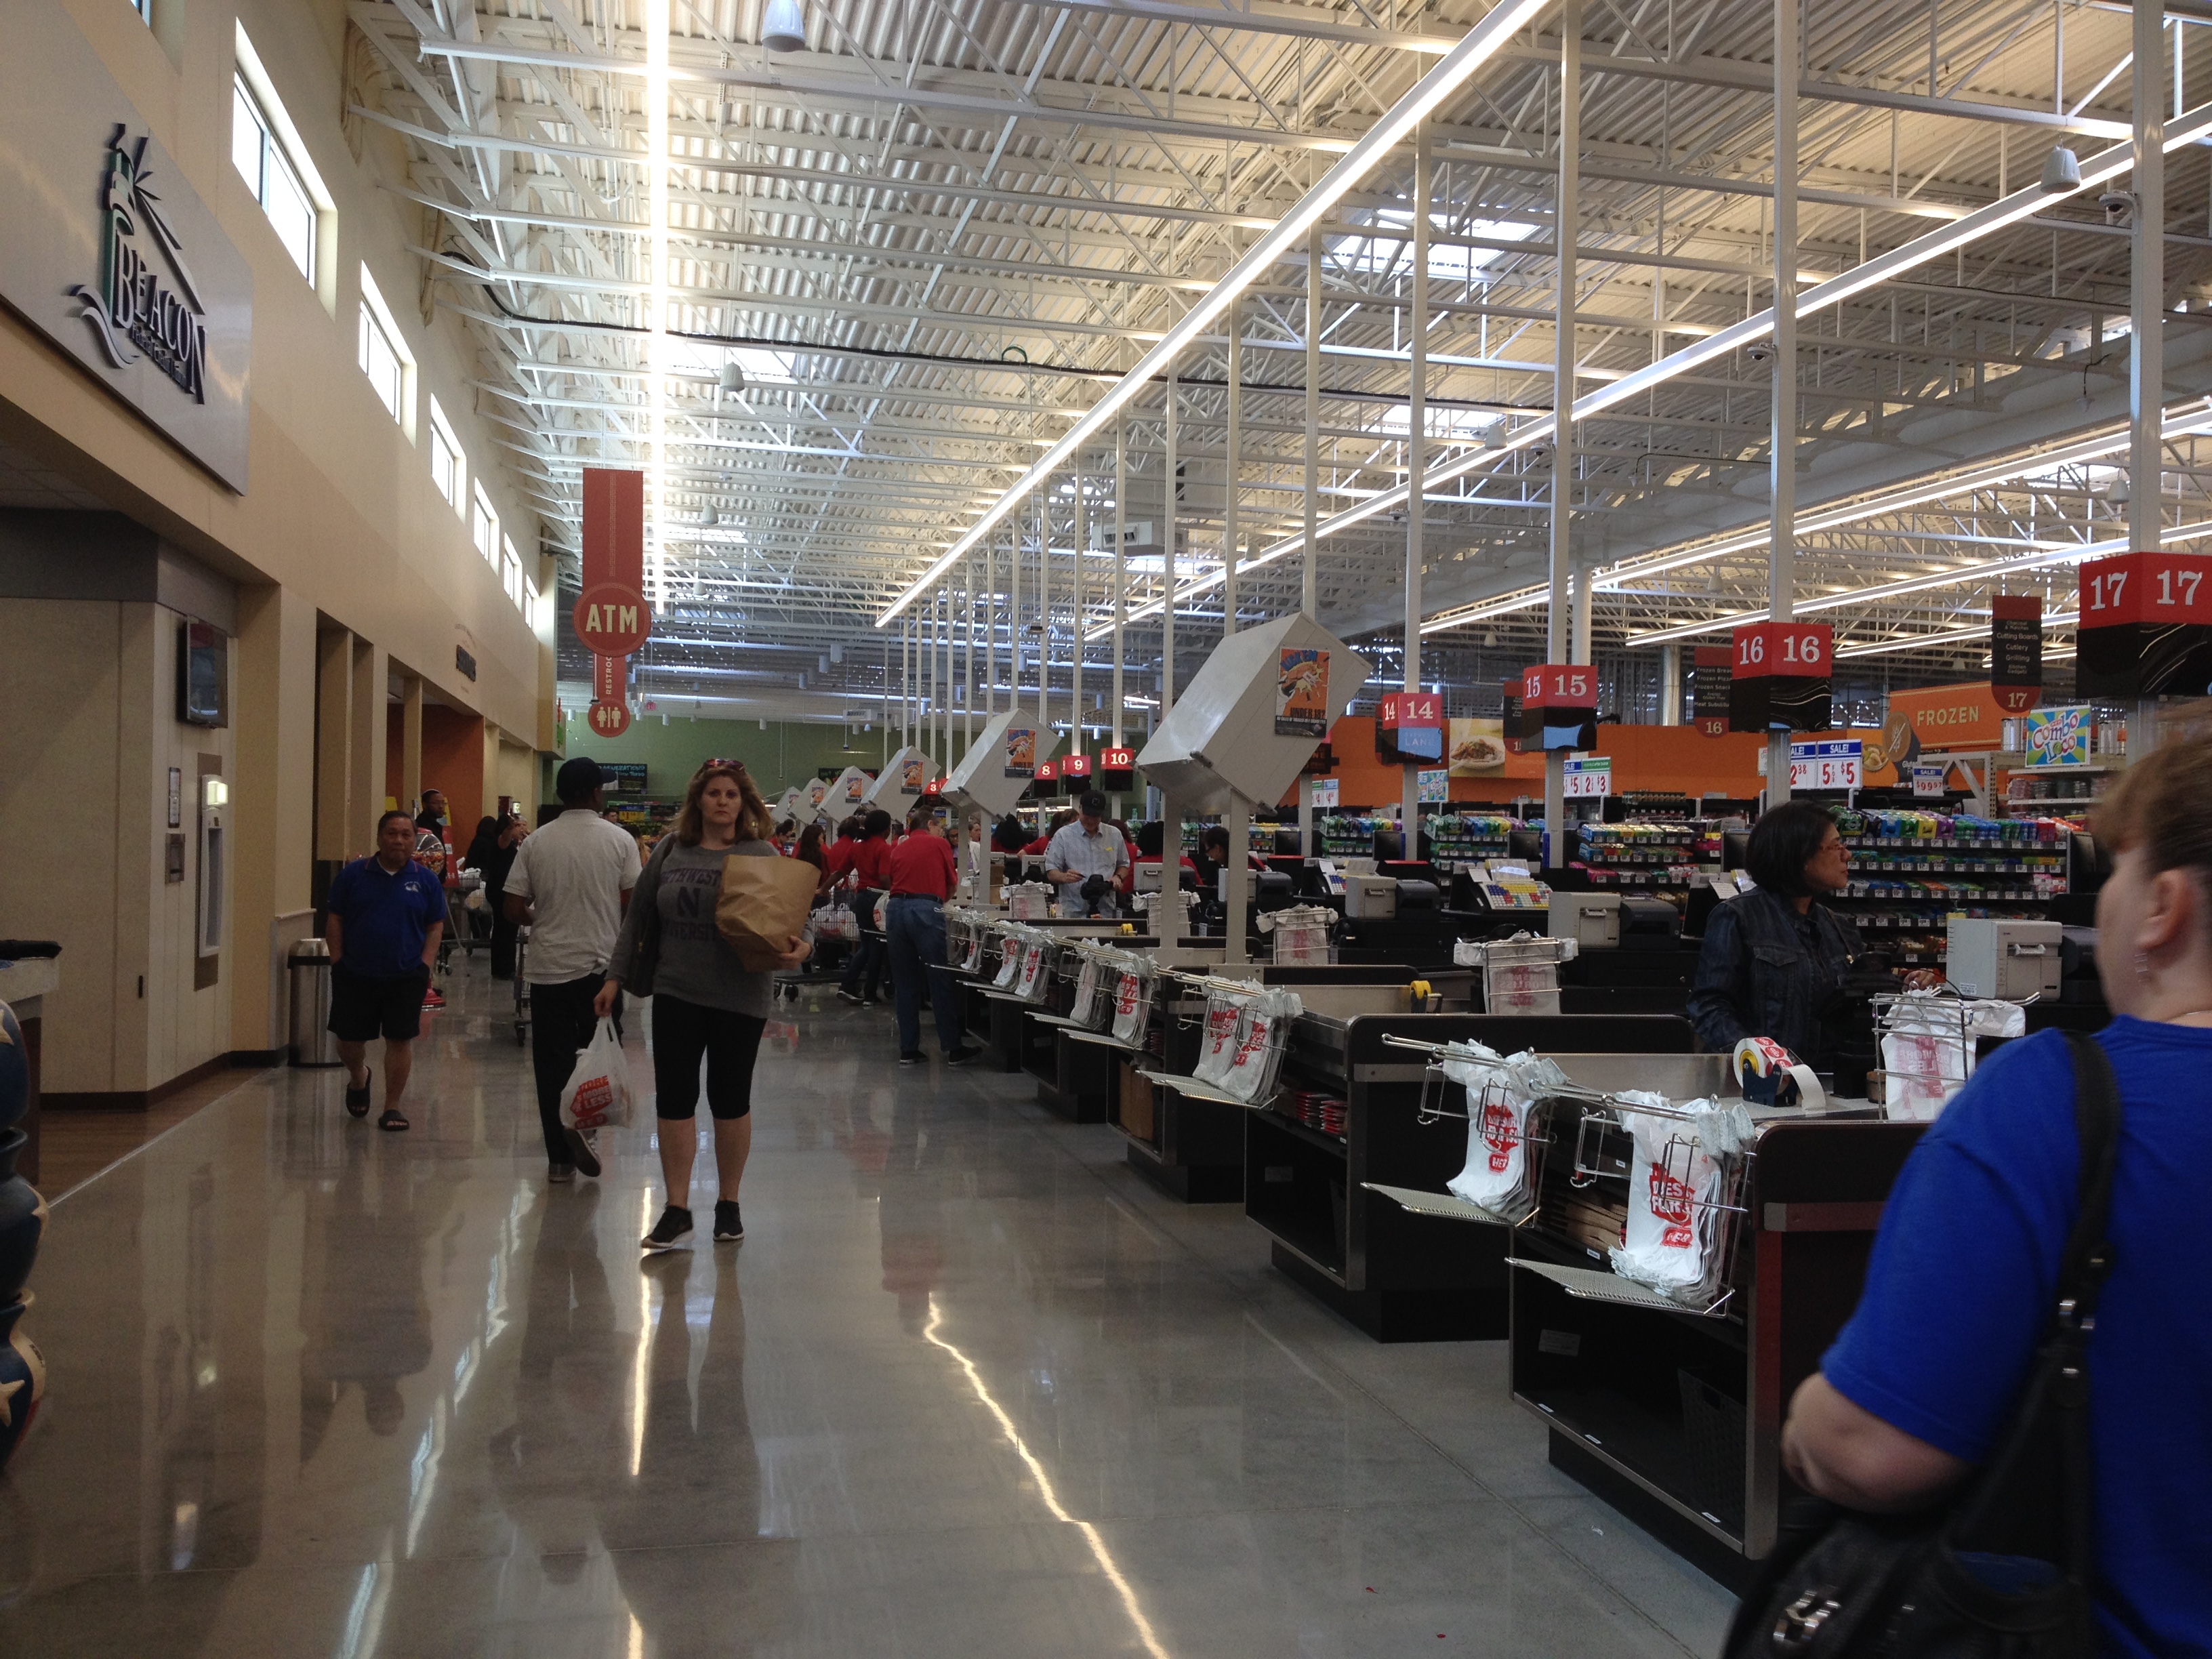 Lots of checkout lanes!